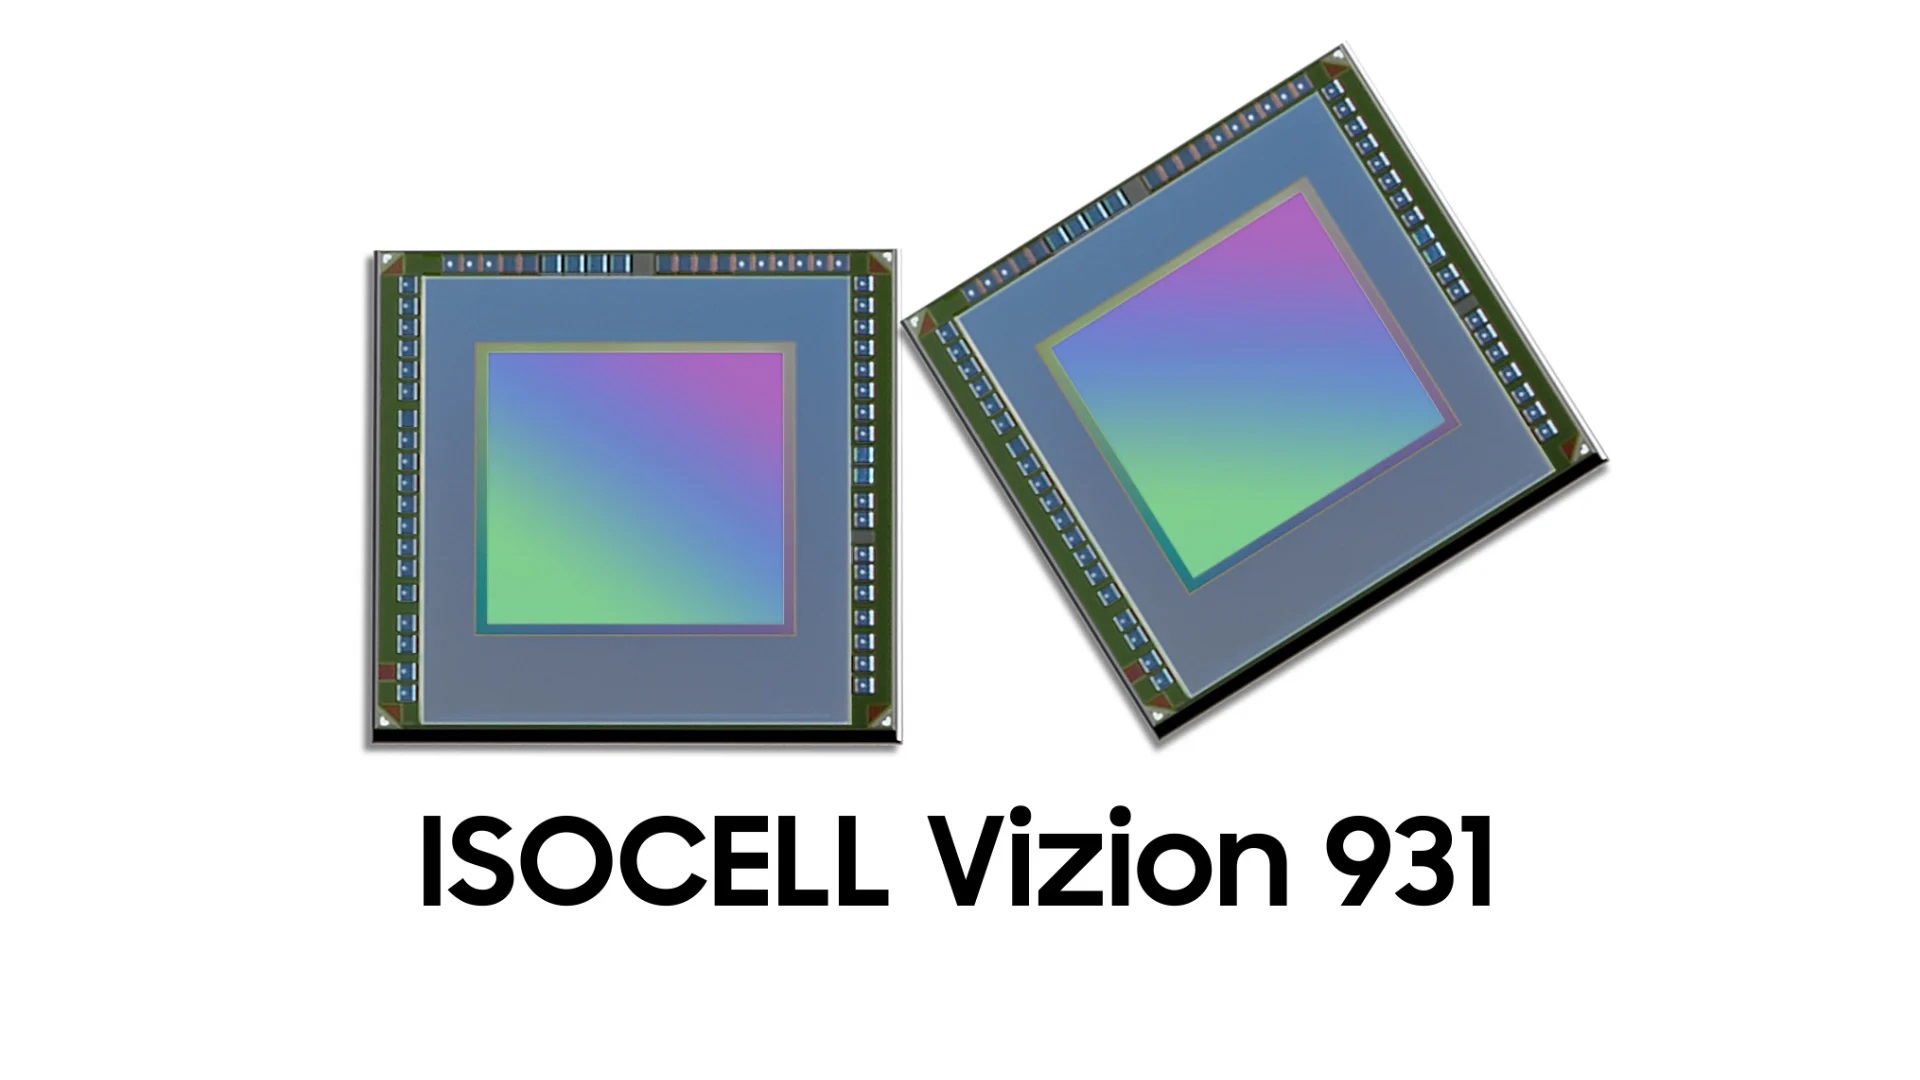 ISOCELL Vision 931